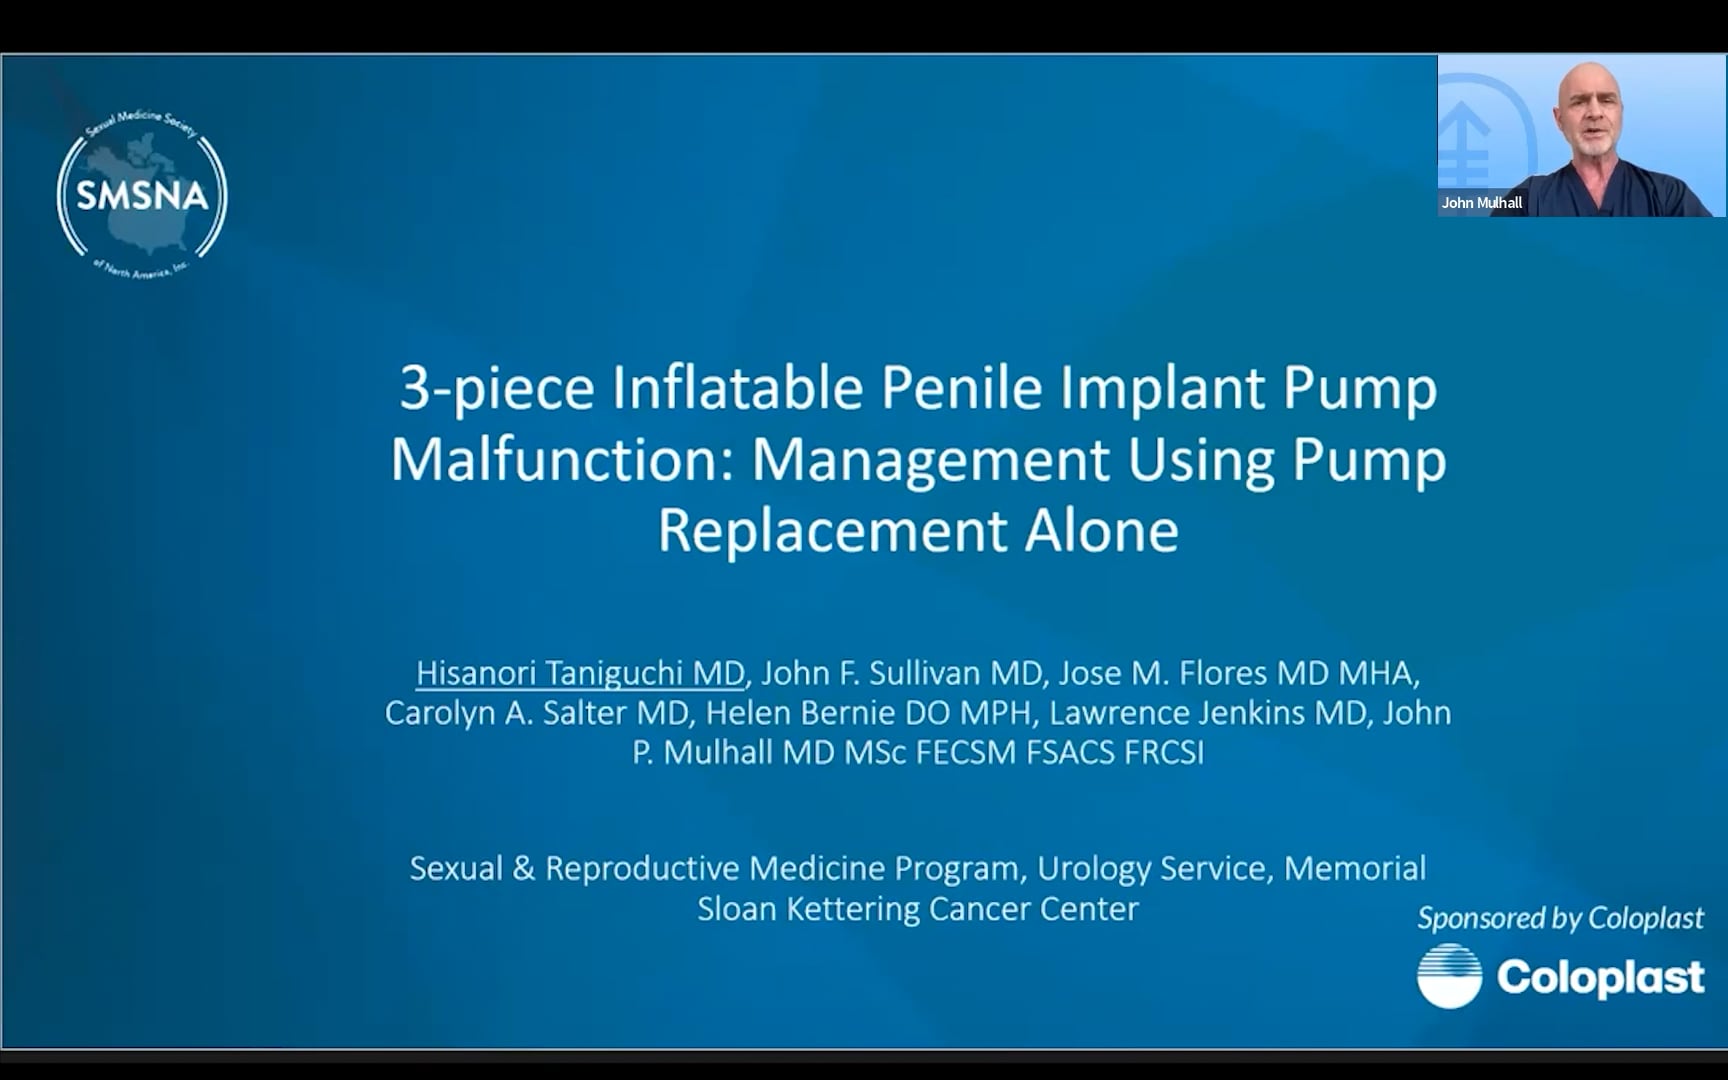 3-piece Inflatable Penile Implant Pump Malfunction: Management Using Pump Replacement Alone